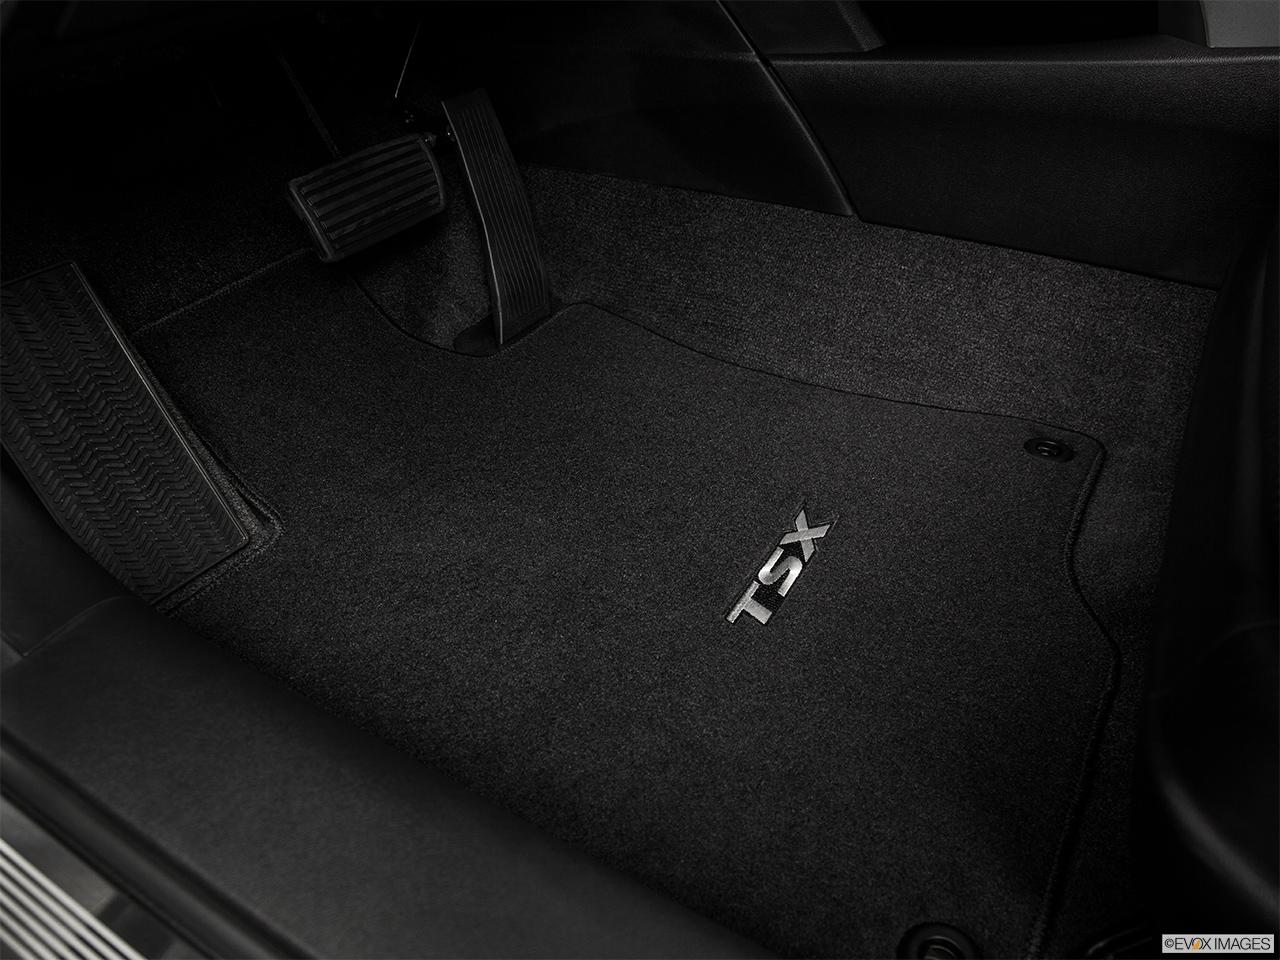 2014 Acura TSX 5-Speed Automatic Driver's floor mat and pedals. Mid-seat level from outside looking in. 